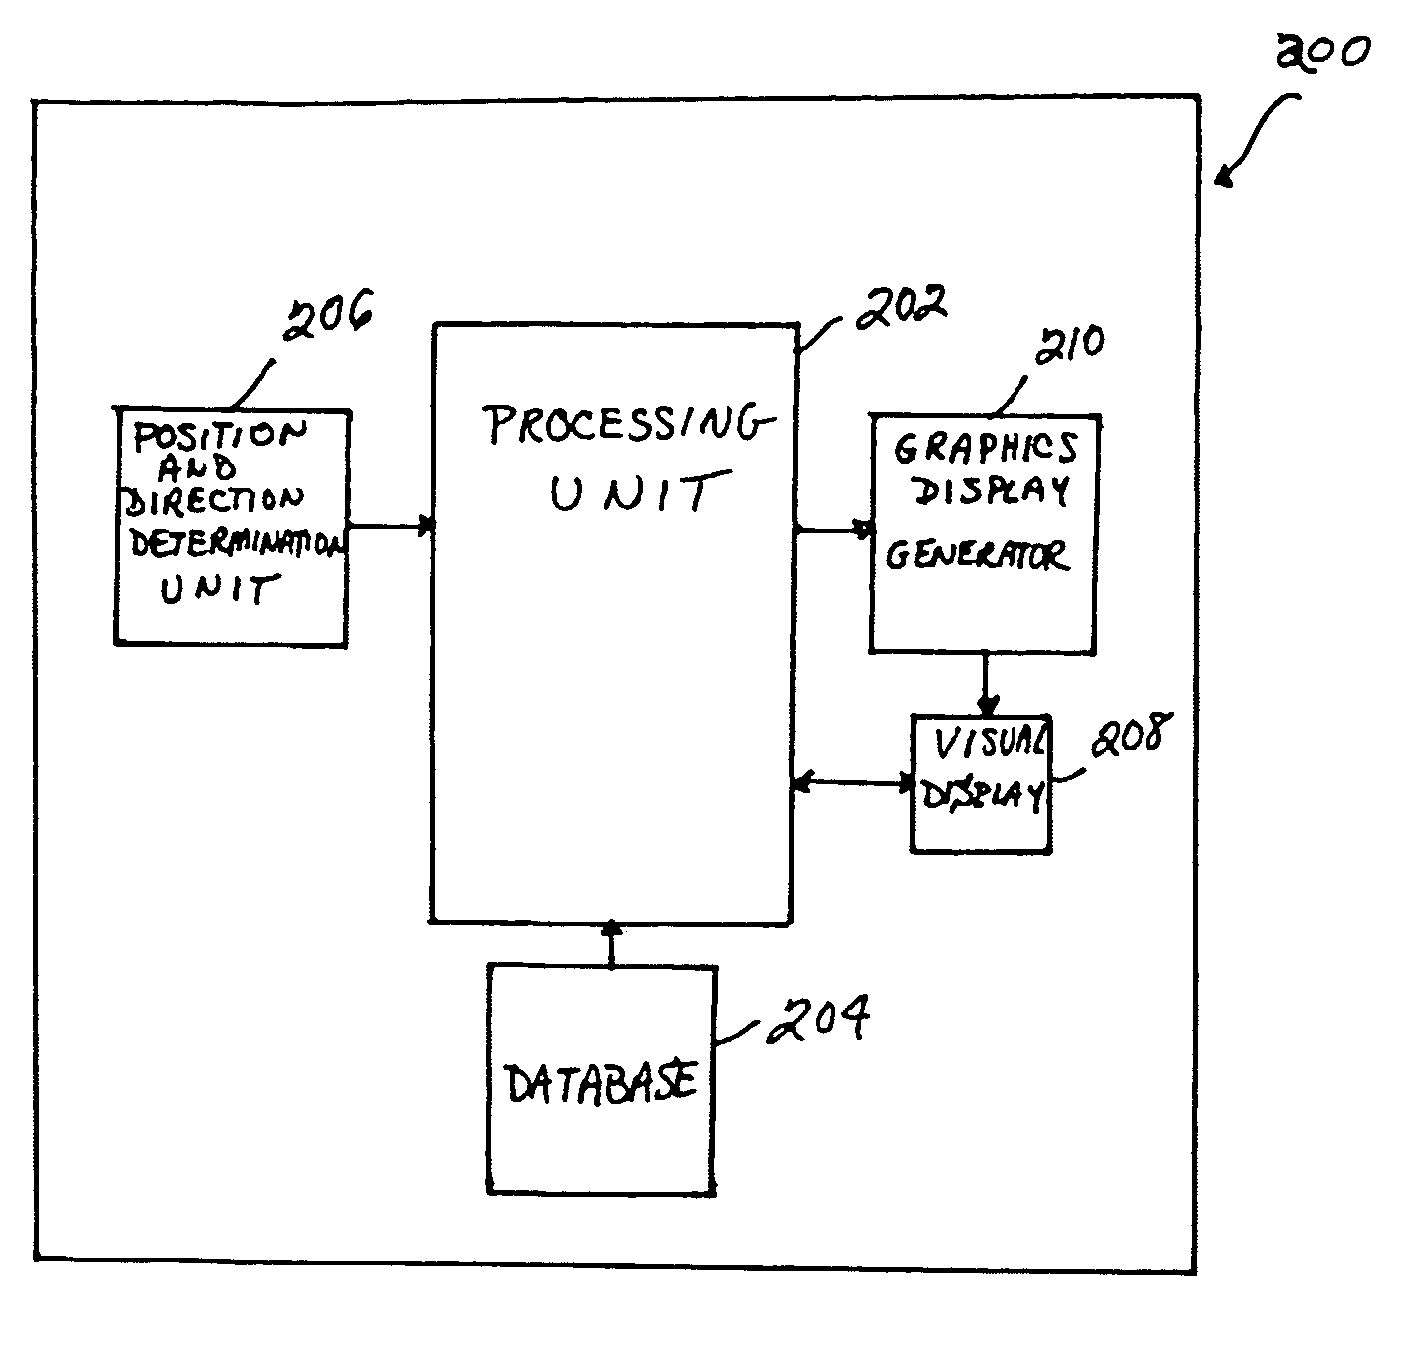 System and method for facilitating target aiming and aircraft control using aircraft displays